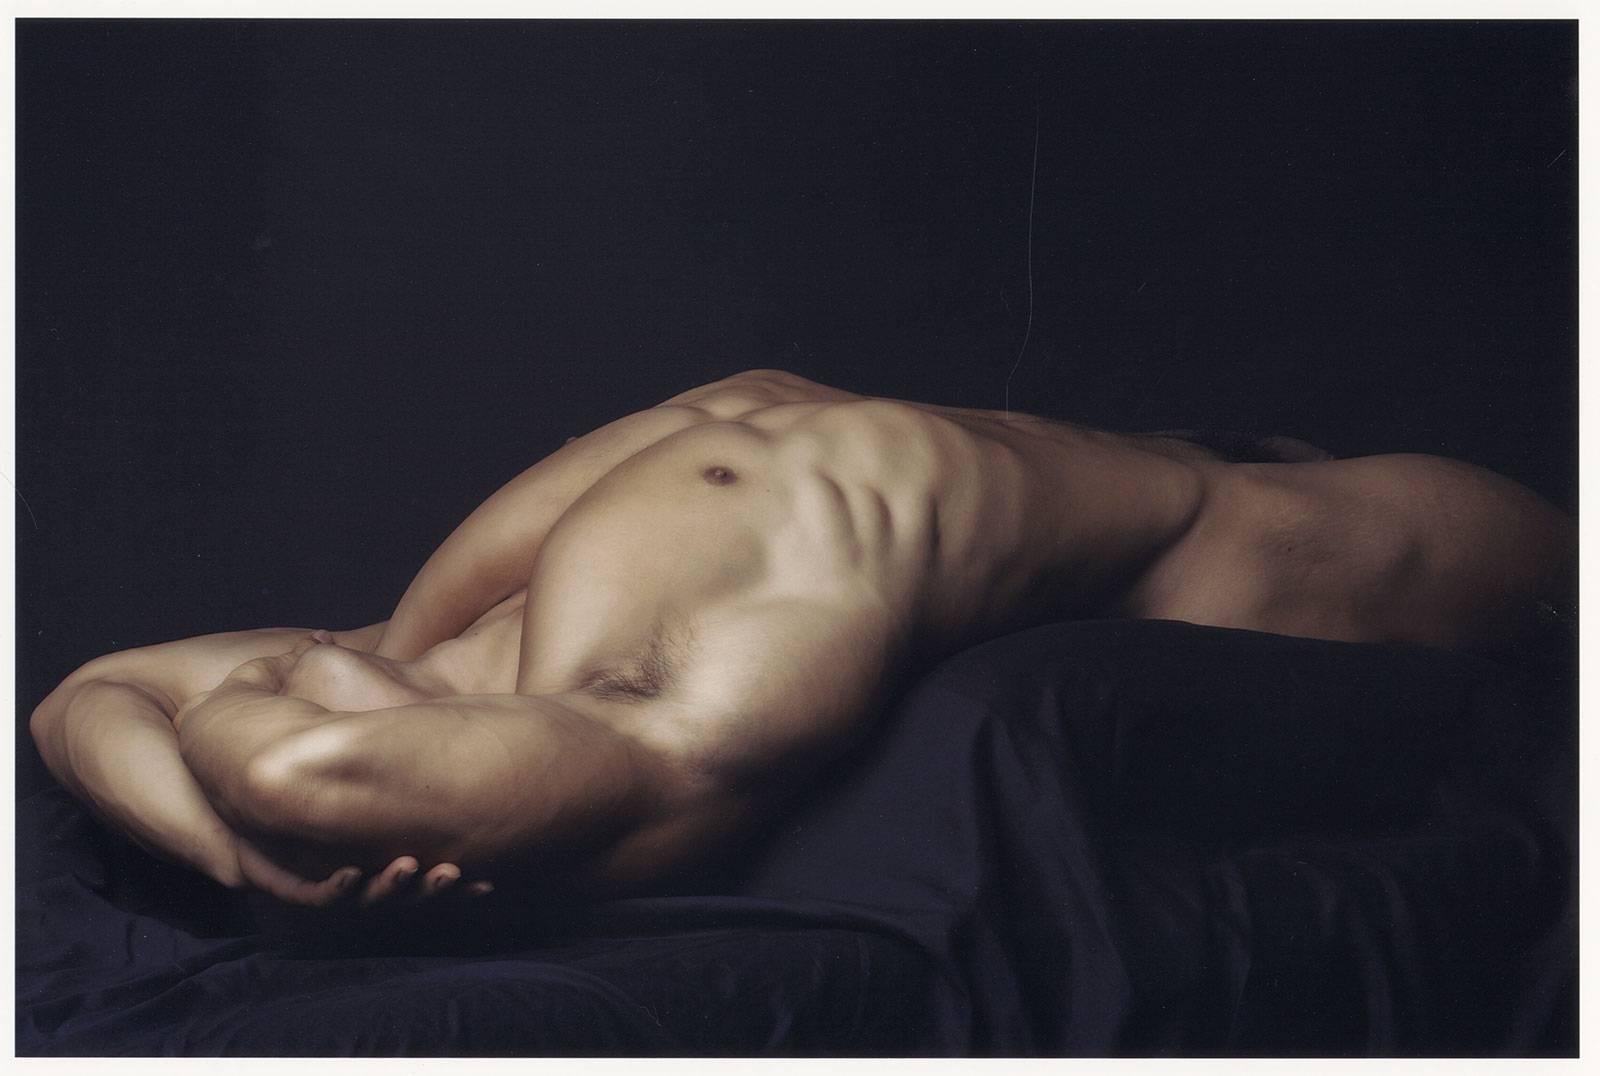 Dylan Ricci Figurative Photograph - Male Nude #135 (young male nude lying with raised arms folded across his face)